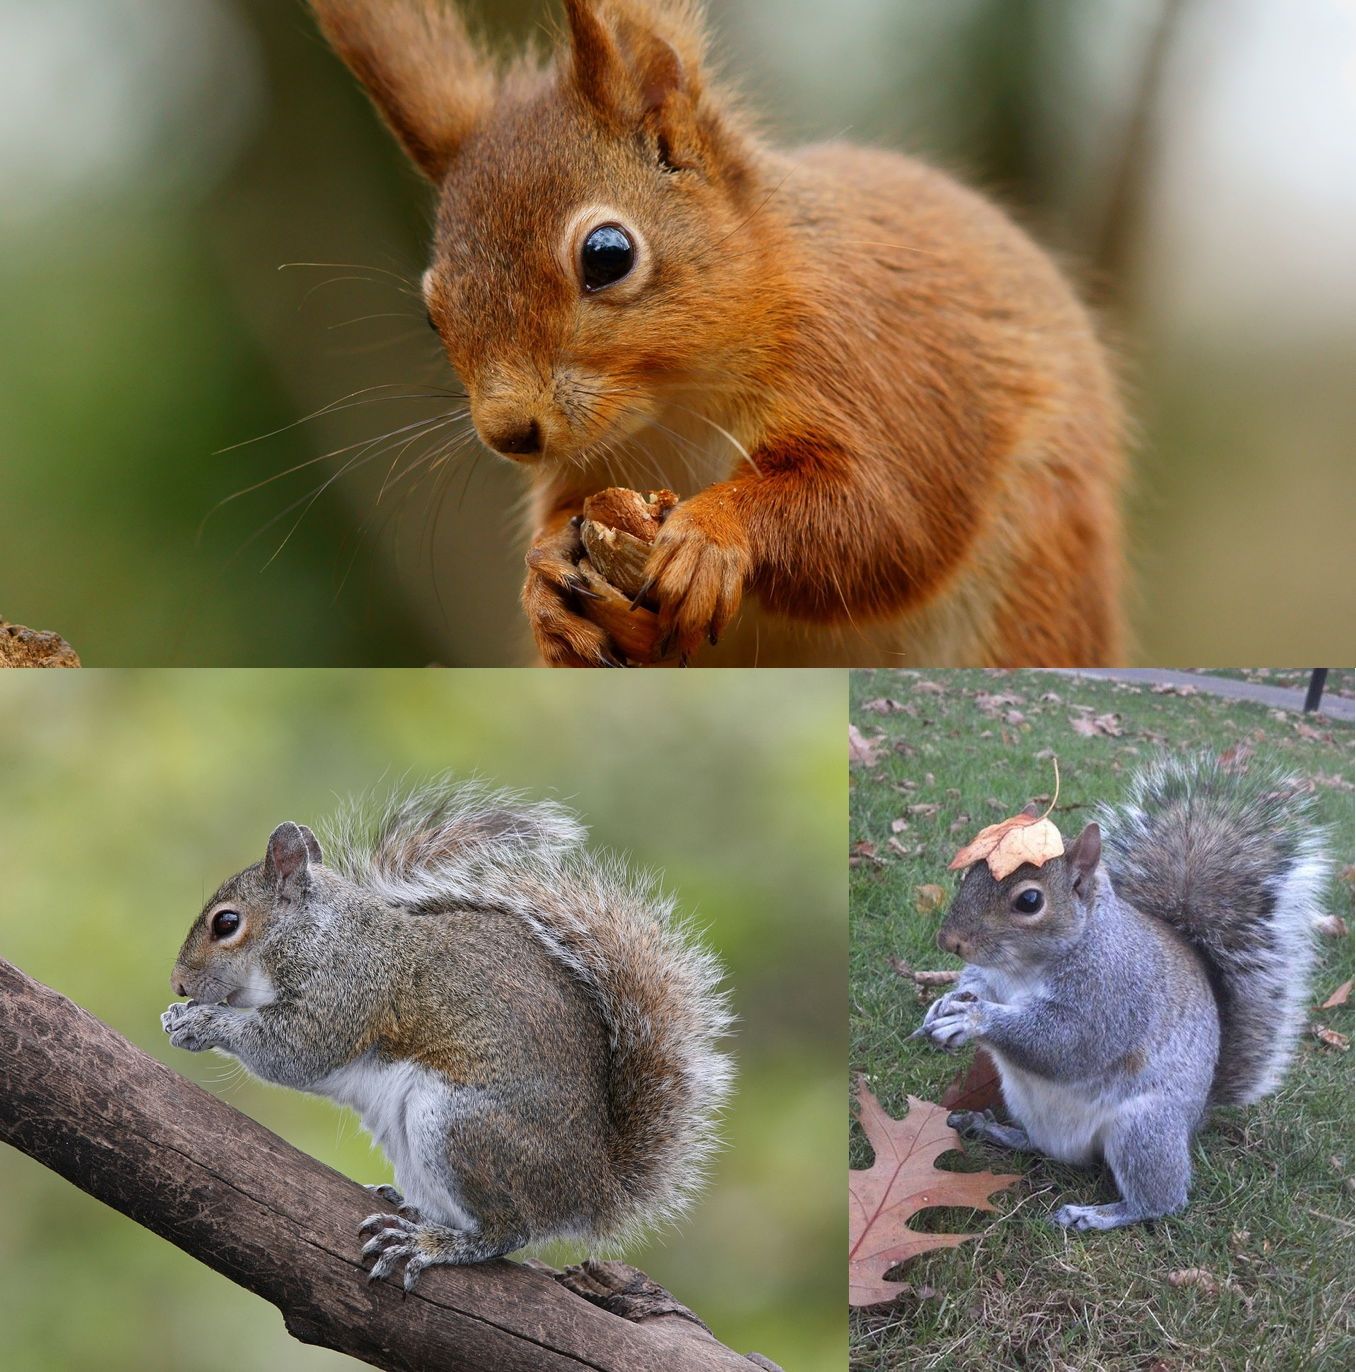 Three images of squirrels returned when querying "squirrels" on DuckDuckGo